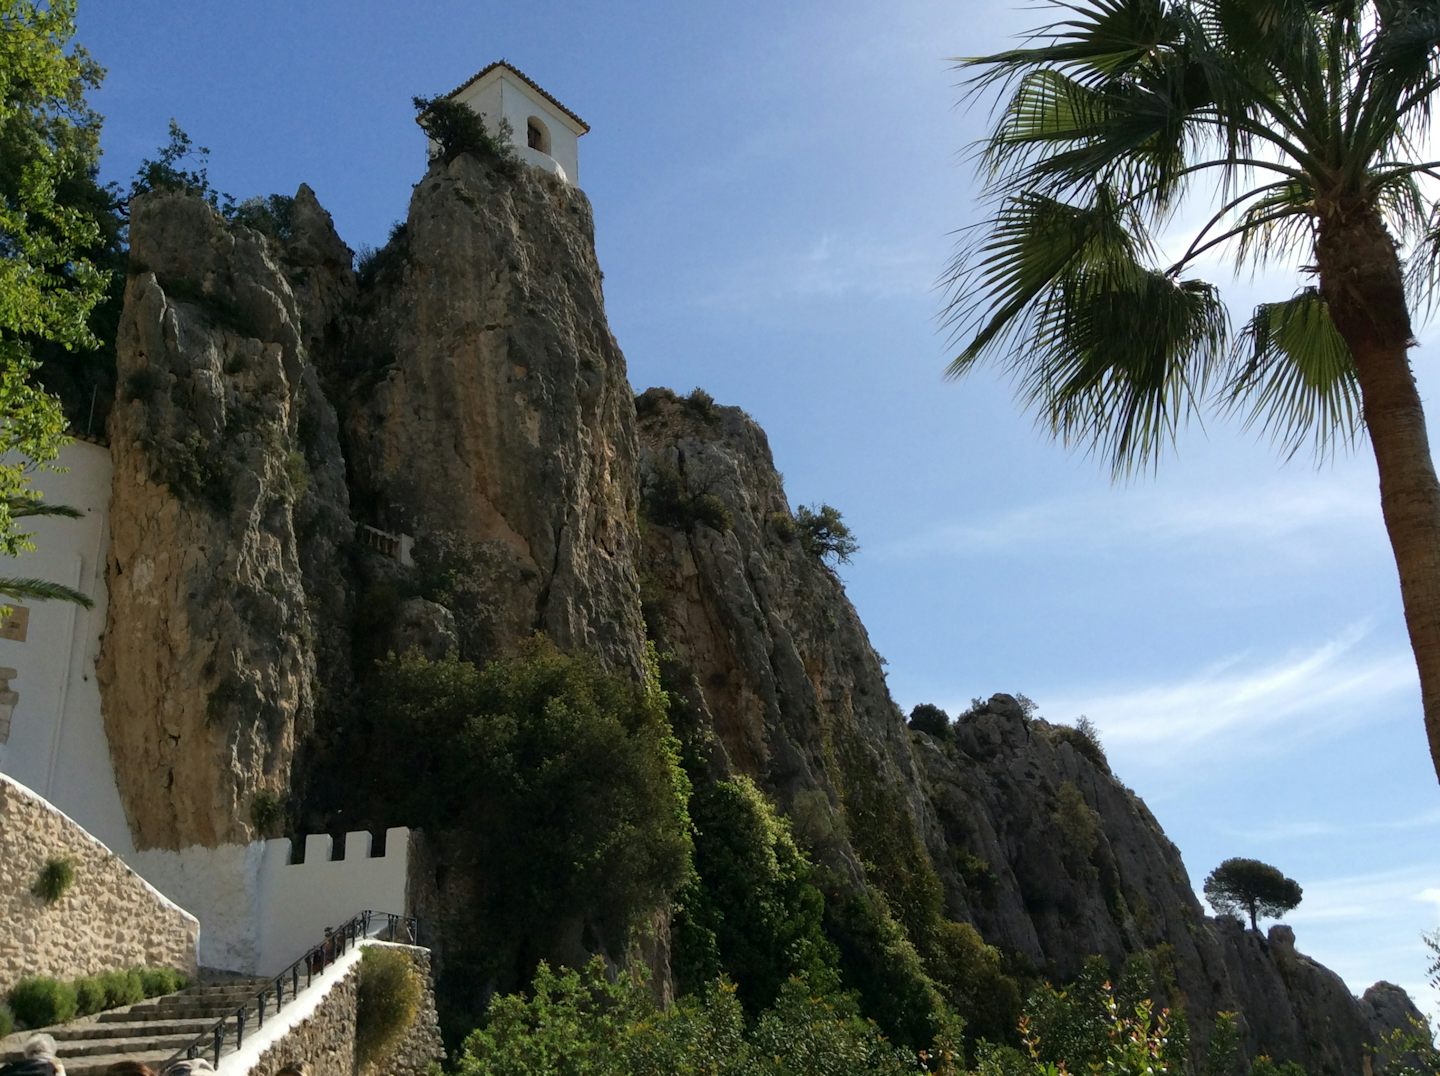 The village of Guadaleste (pop. 250) is about 4 hours inland from Alicante, which is Spain